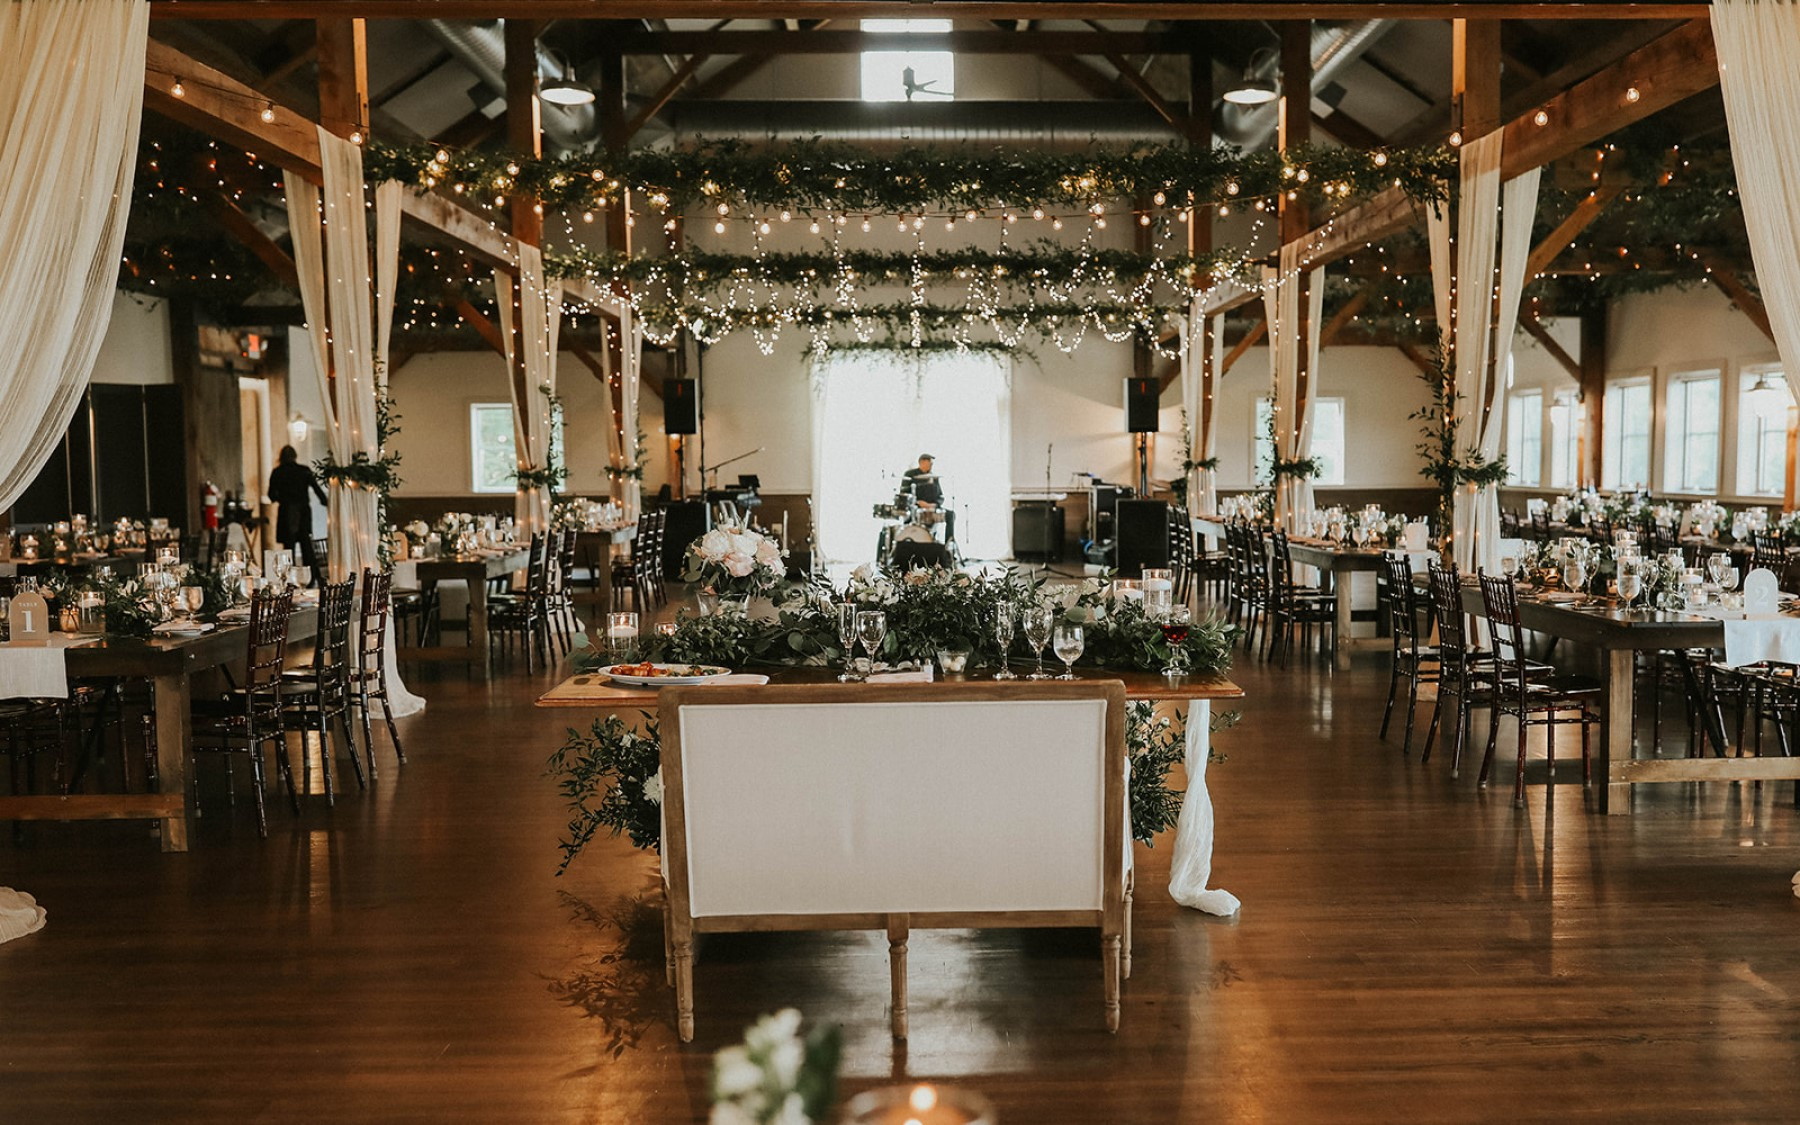 event barn decorated with white florals, drapery, and string lights with sweetheart table in the center with a white loveseat.